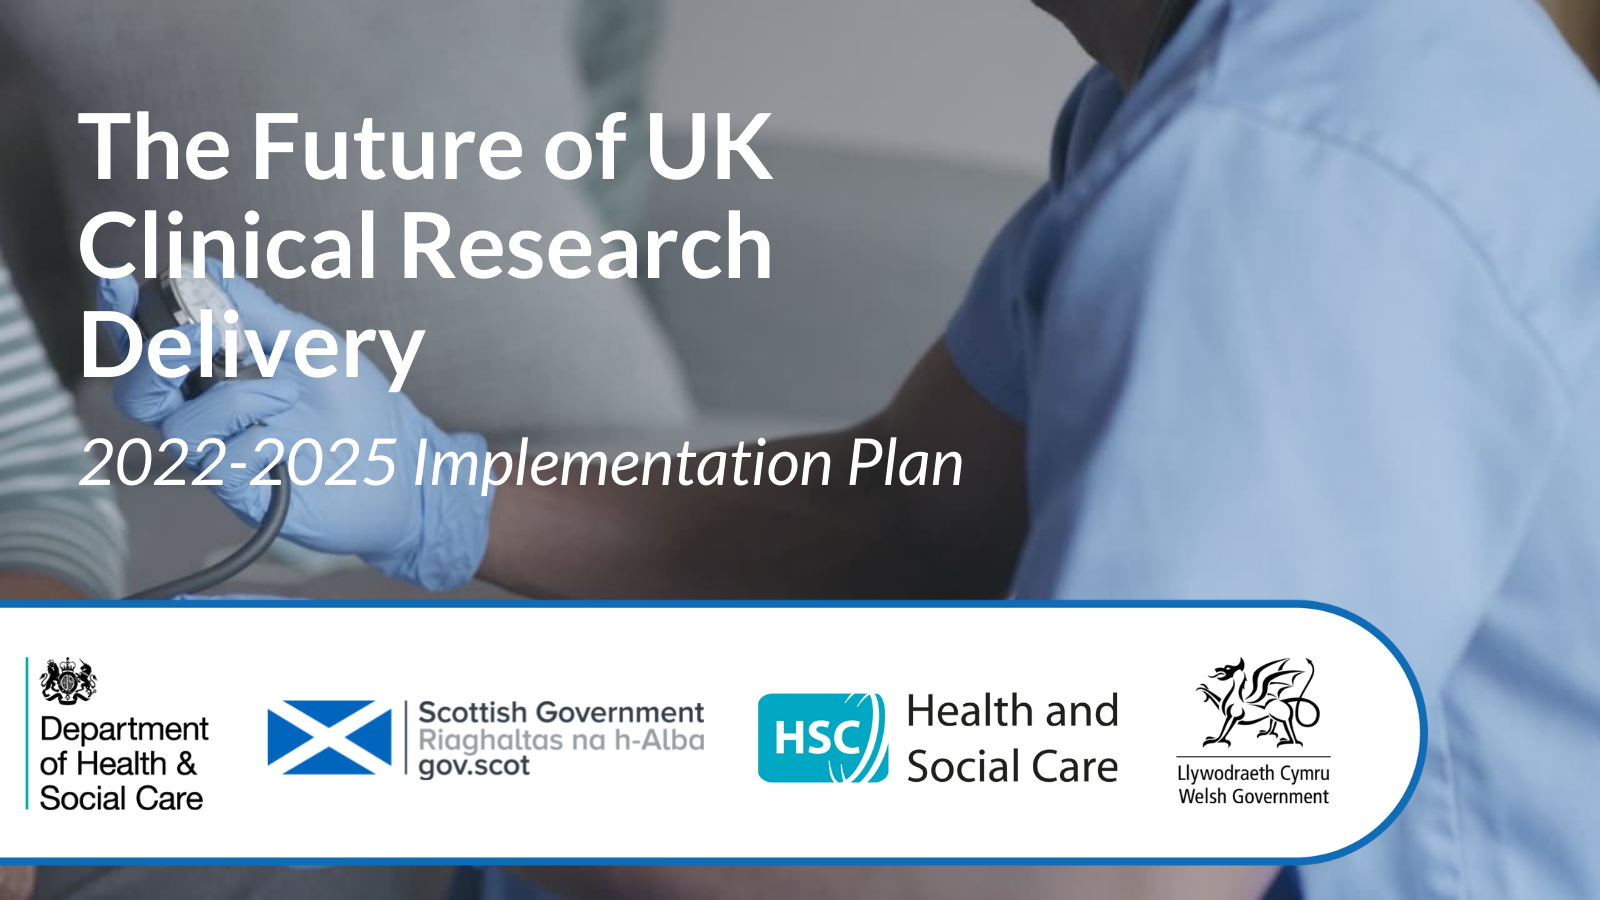 NIHR leads the way in continued drive for improved clinical research delivery